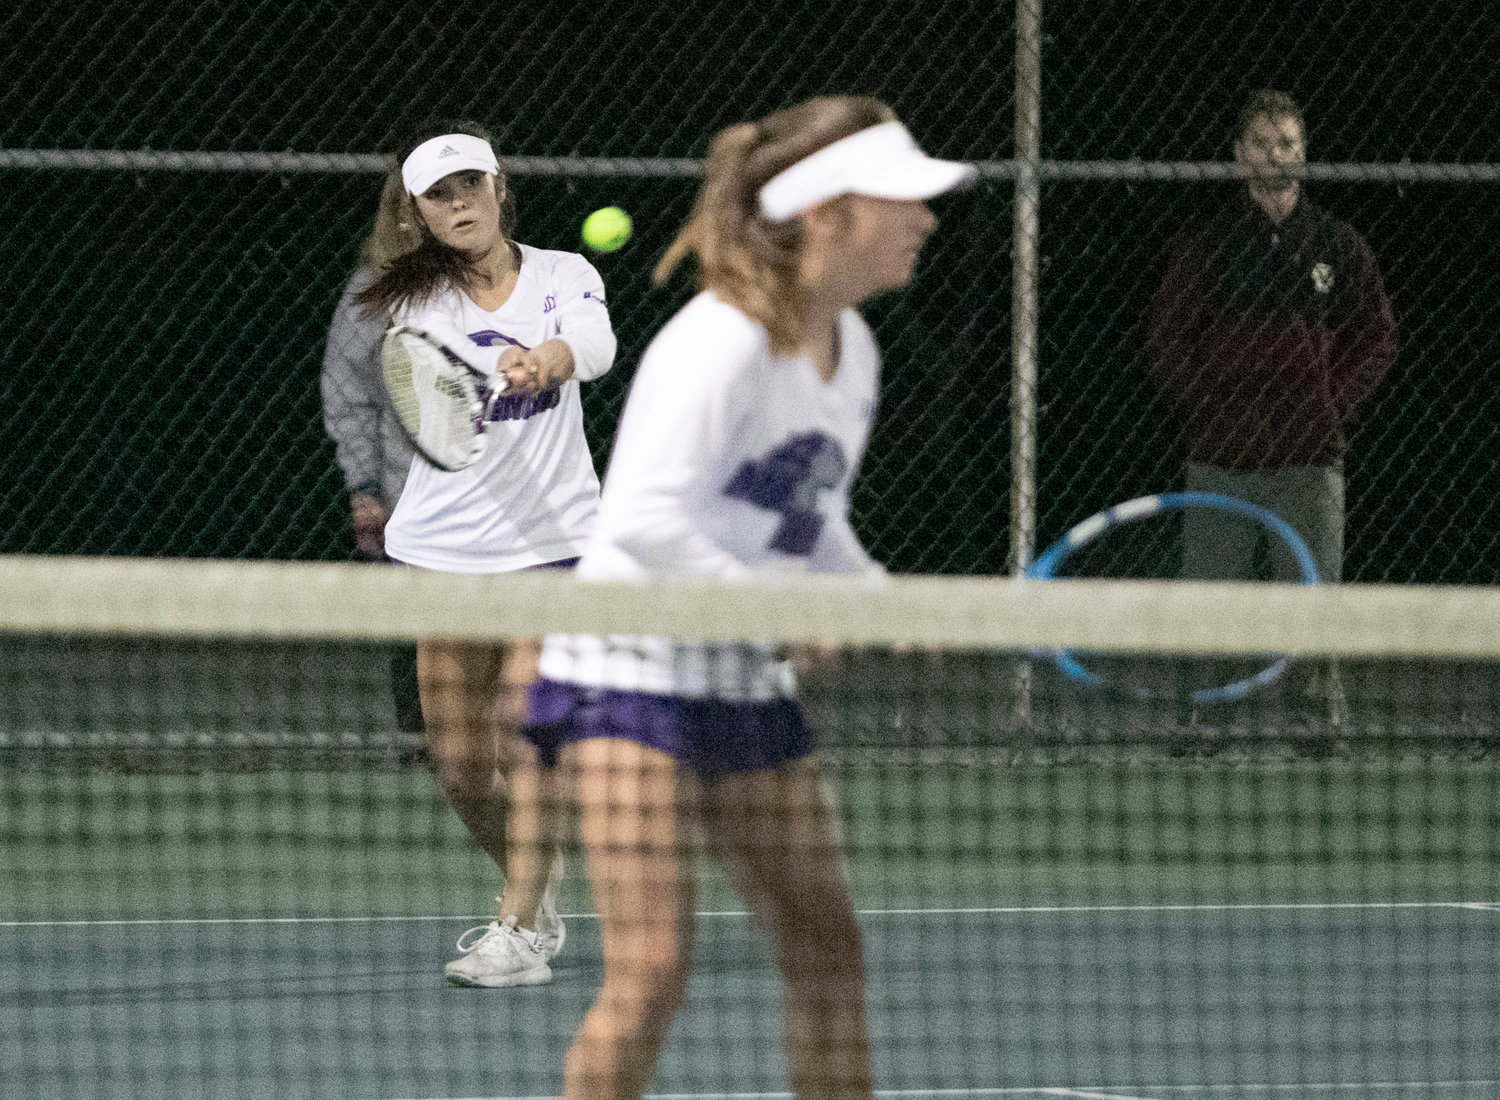 Zelda Hayes hits a backhand during the match, with parterner, Laney Dufficy at net.